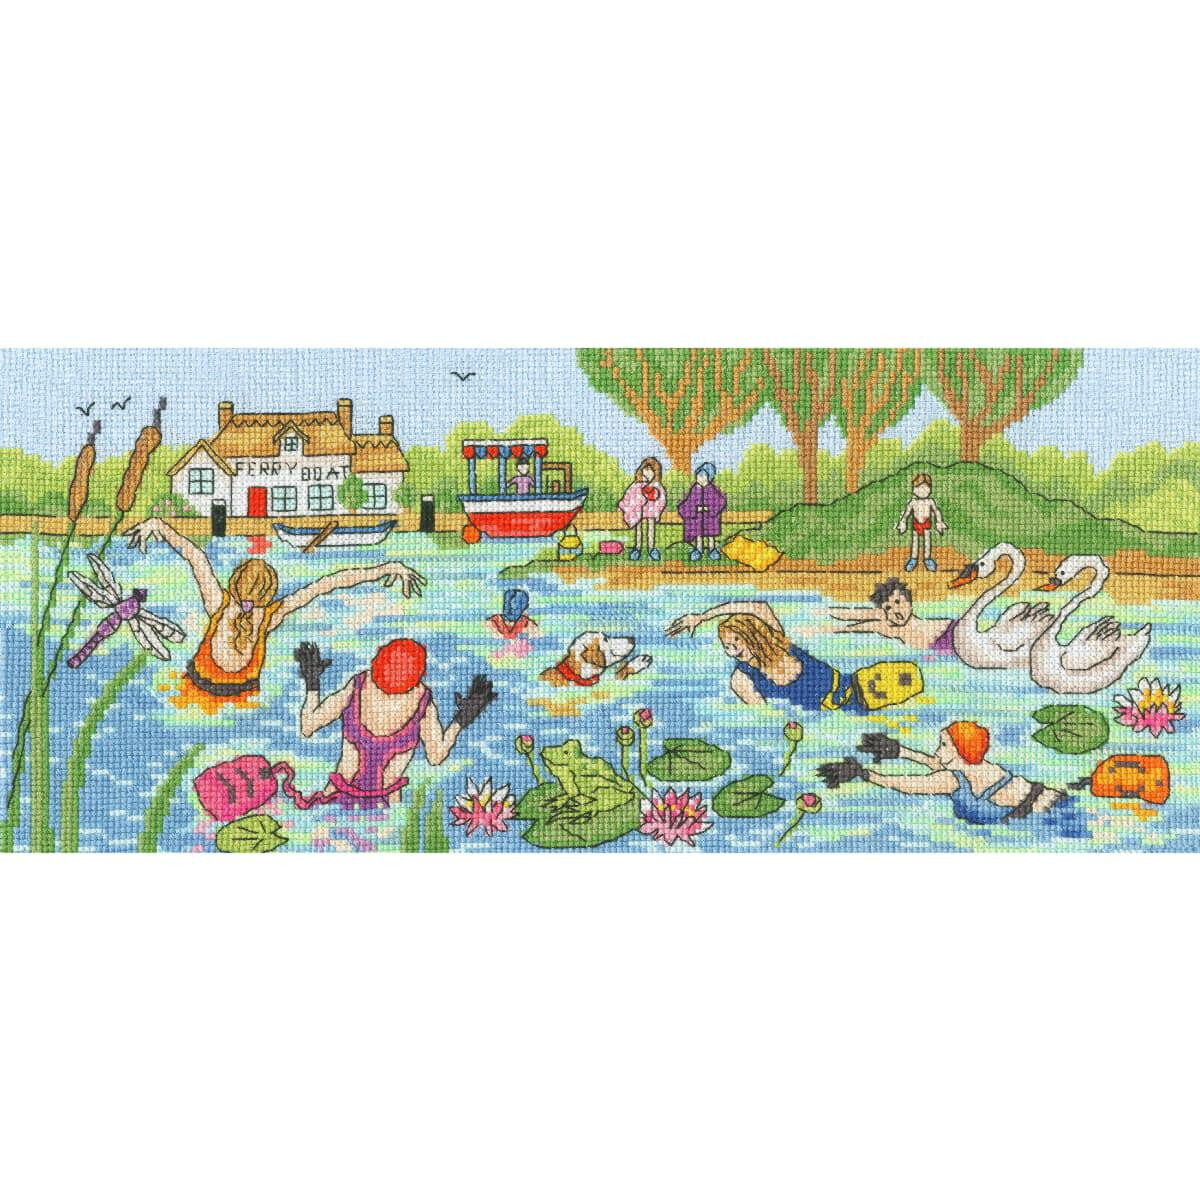 Colorful embroidery pack showing swimmers in a pond with...